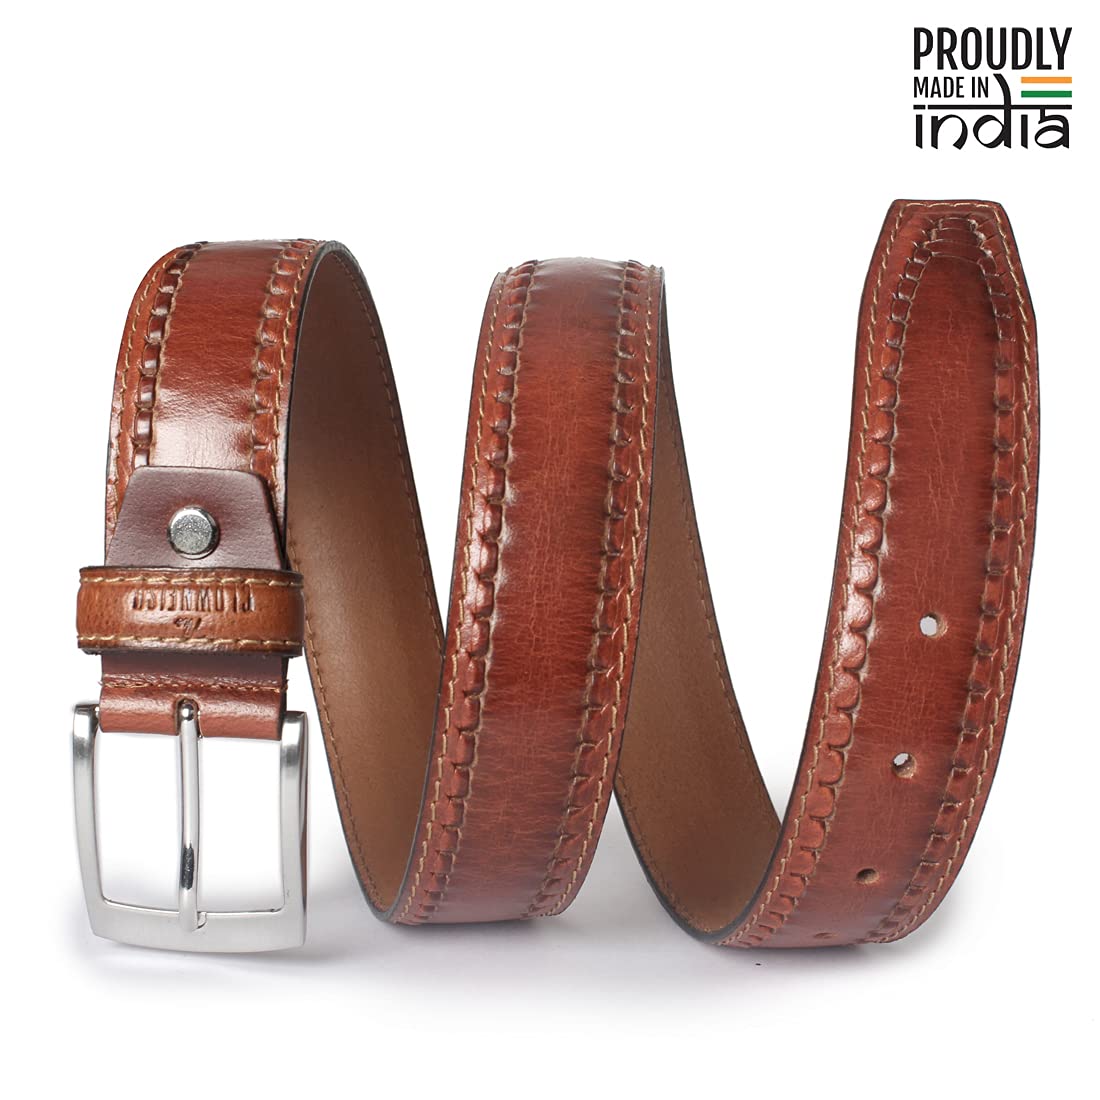 THE CLOWNFISH Men's Genuine Leather Belt with Textured/Embossed Design-Ebony (Size-40 inches)